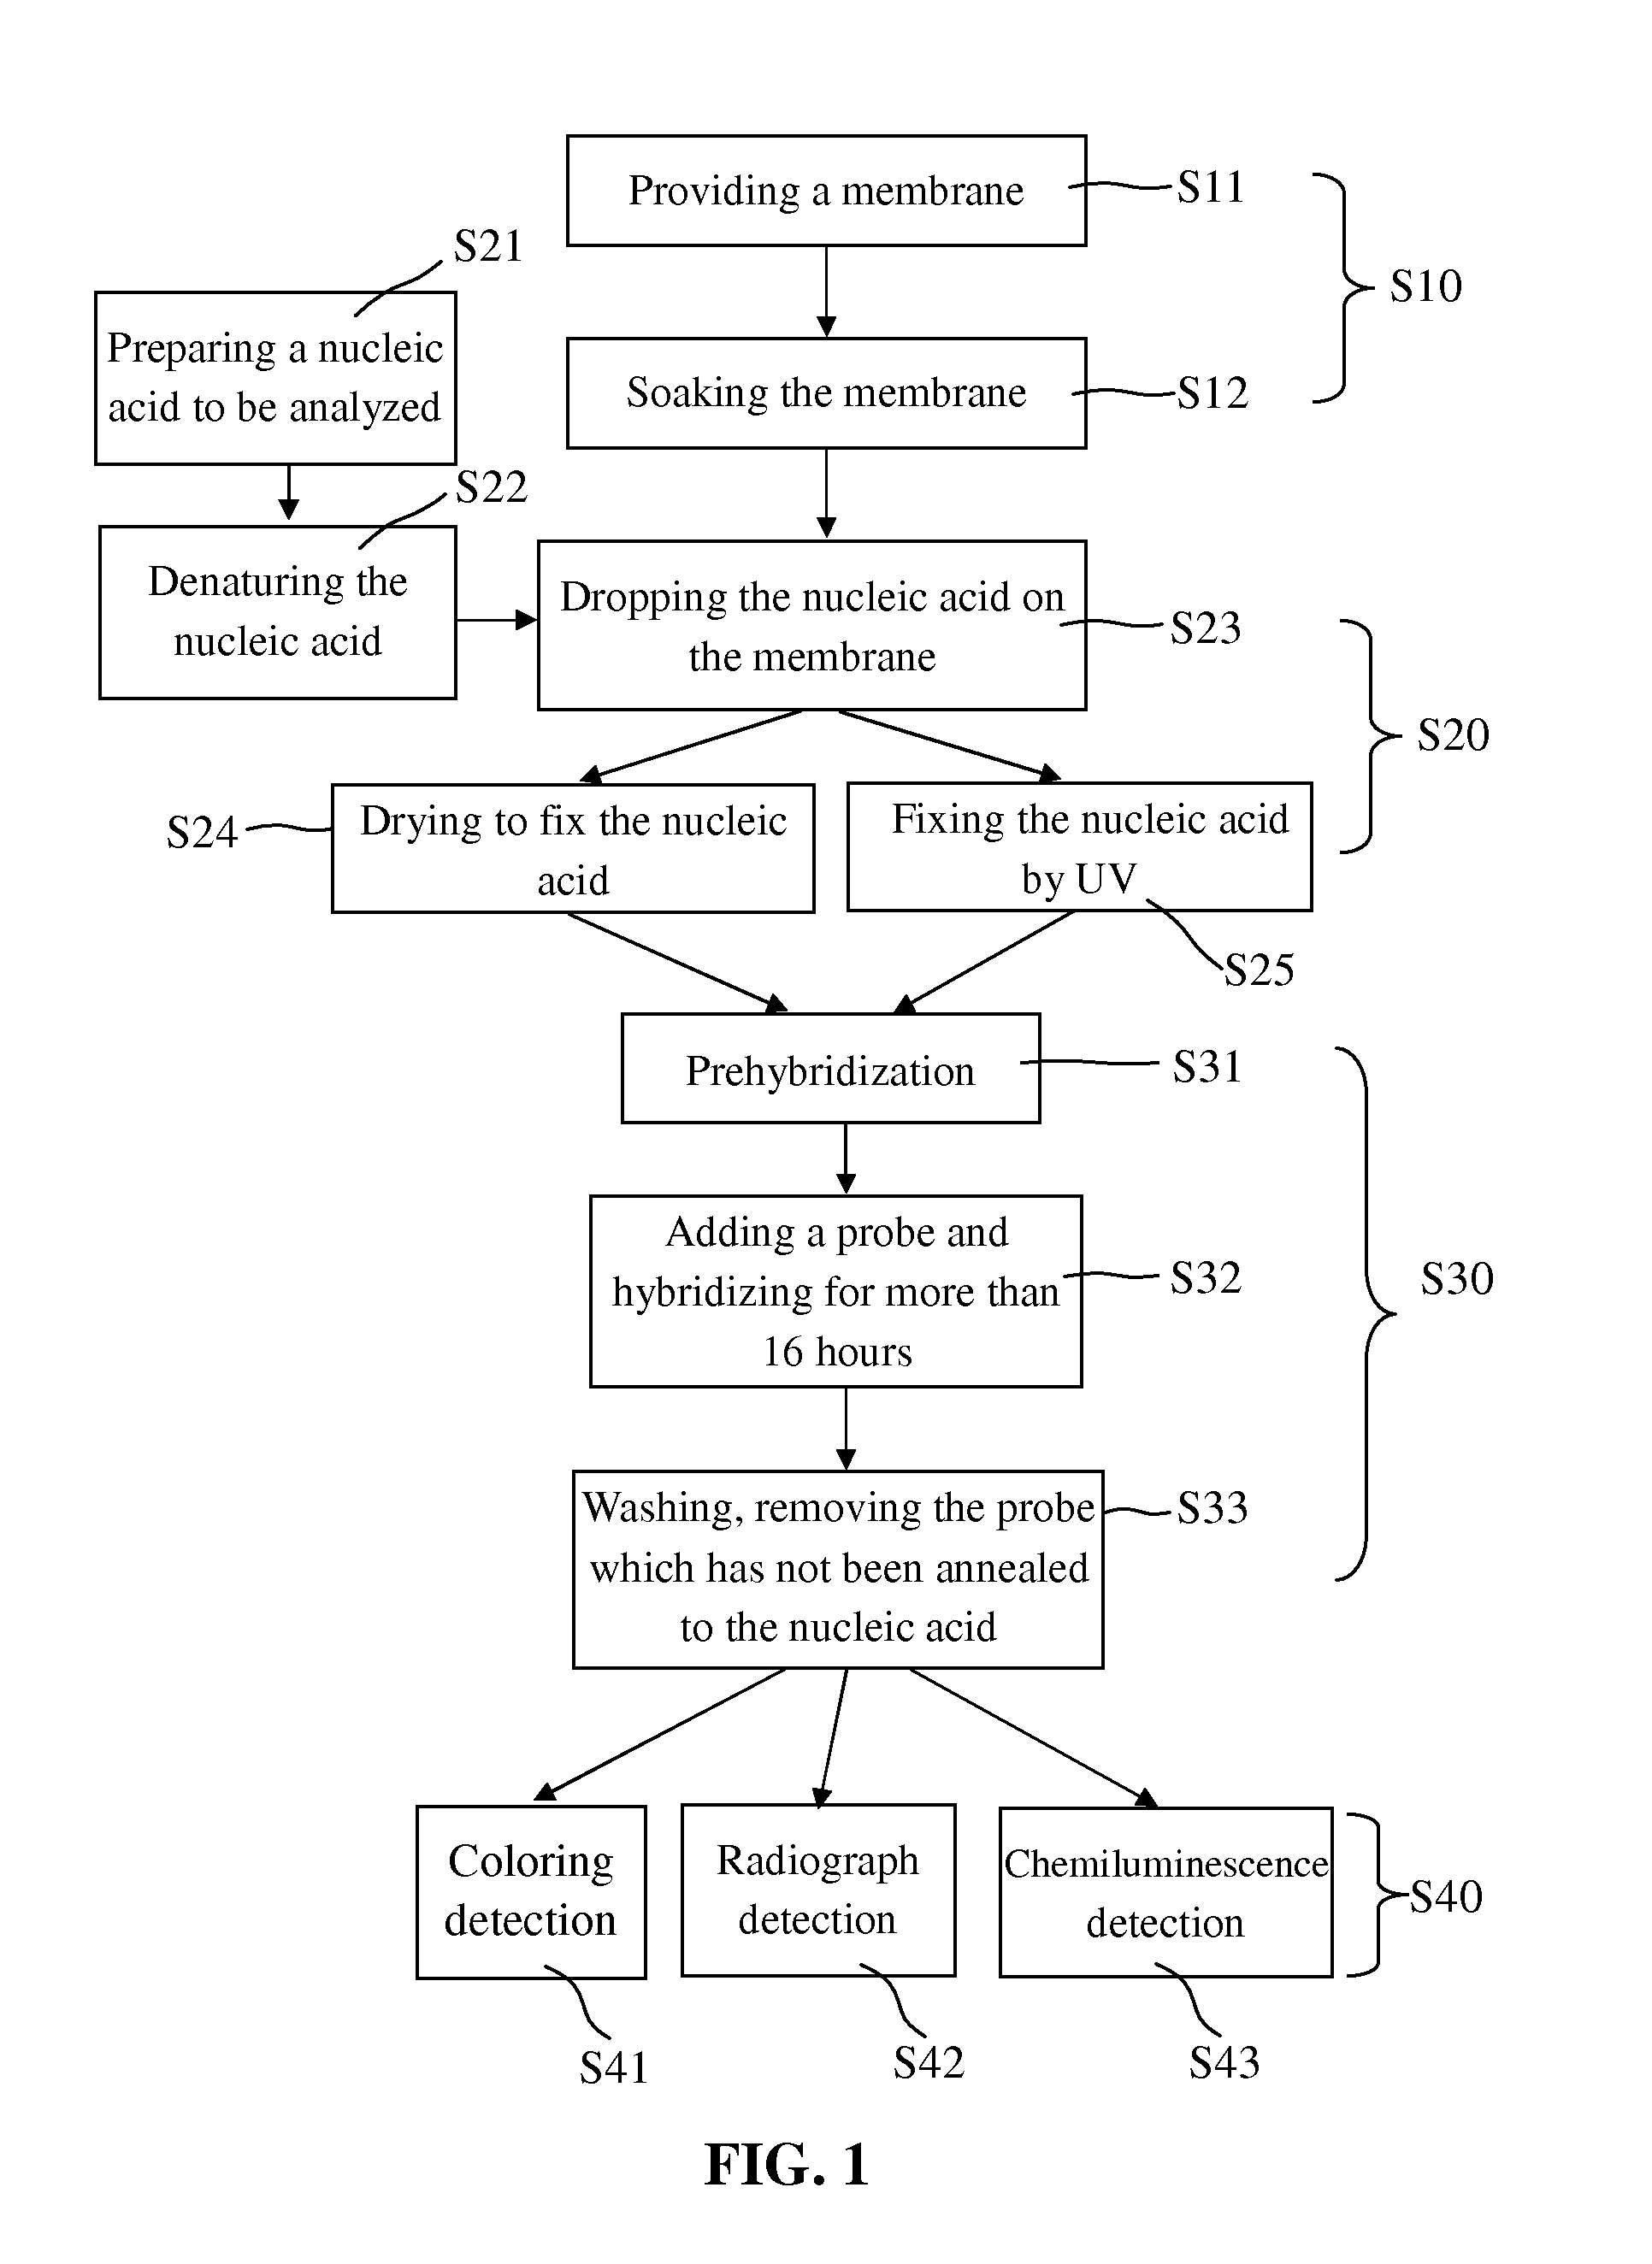 Blotting method for rapidly analyzing nucleic acid